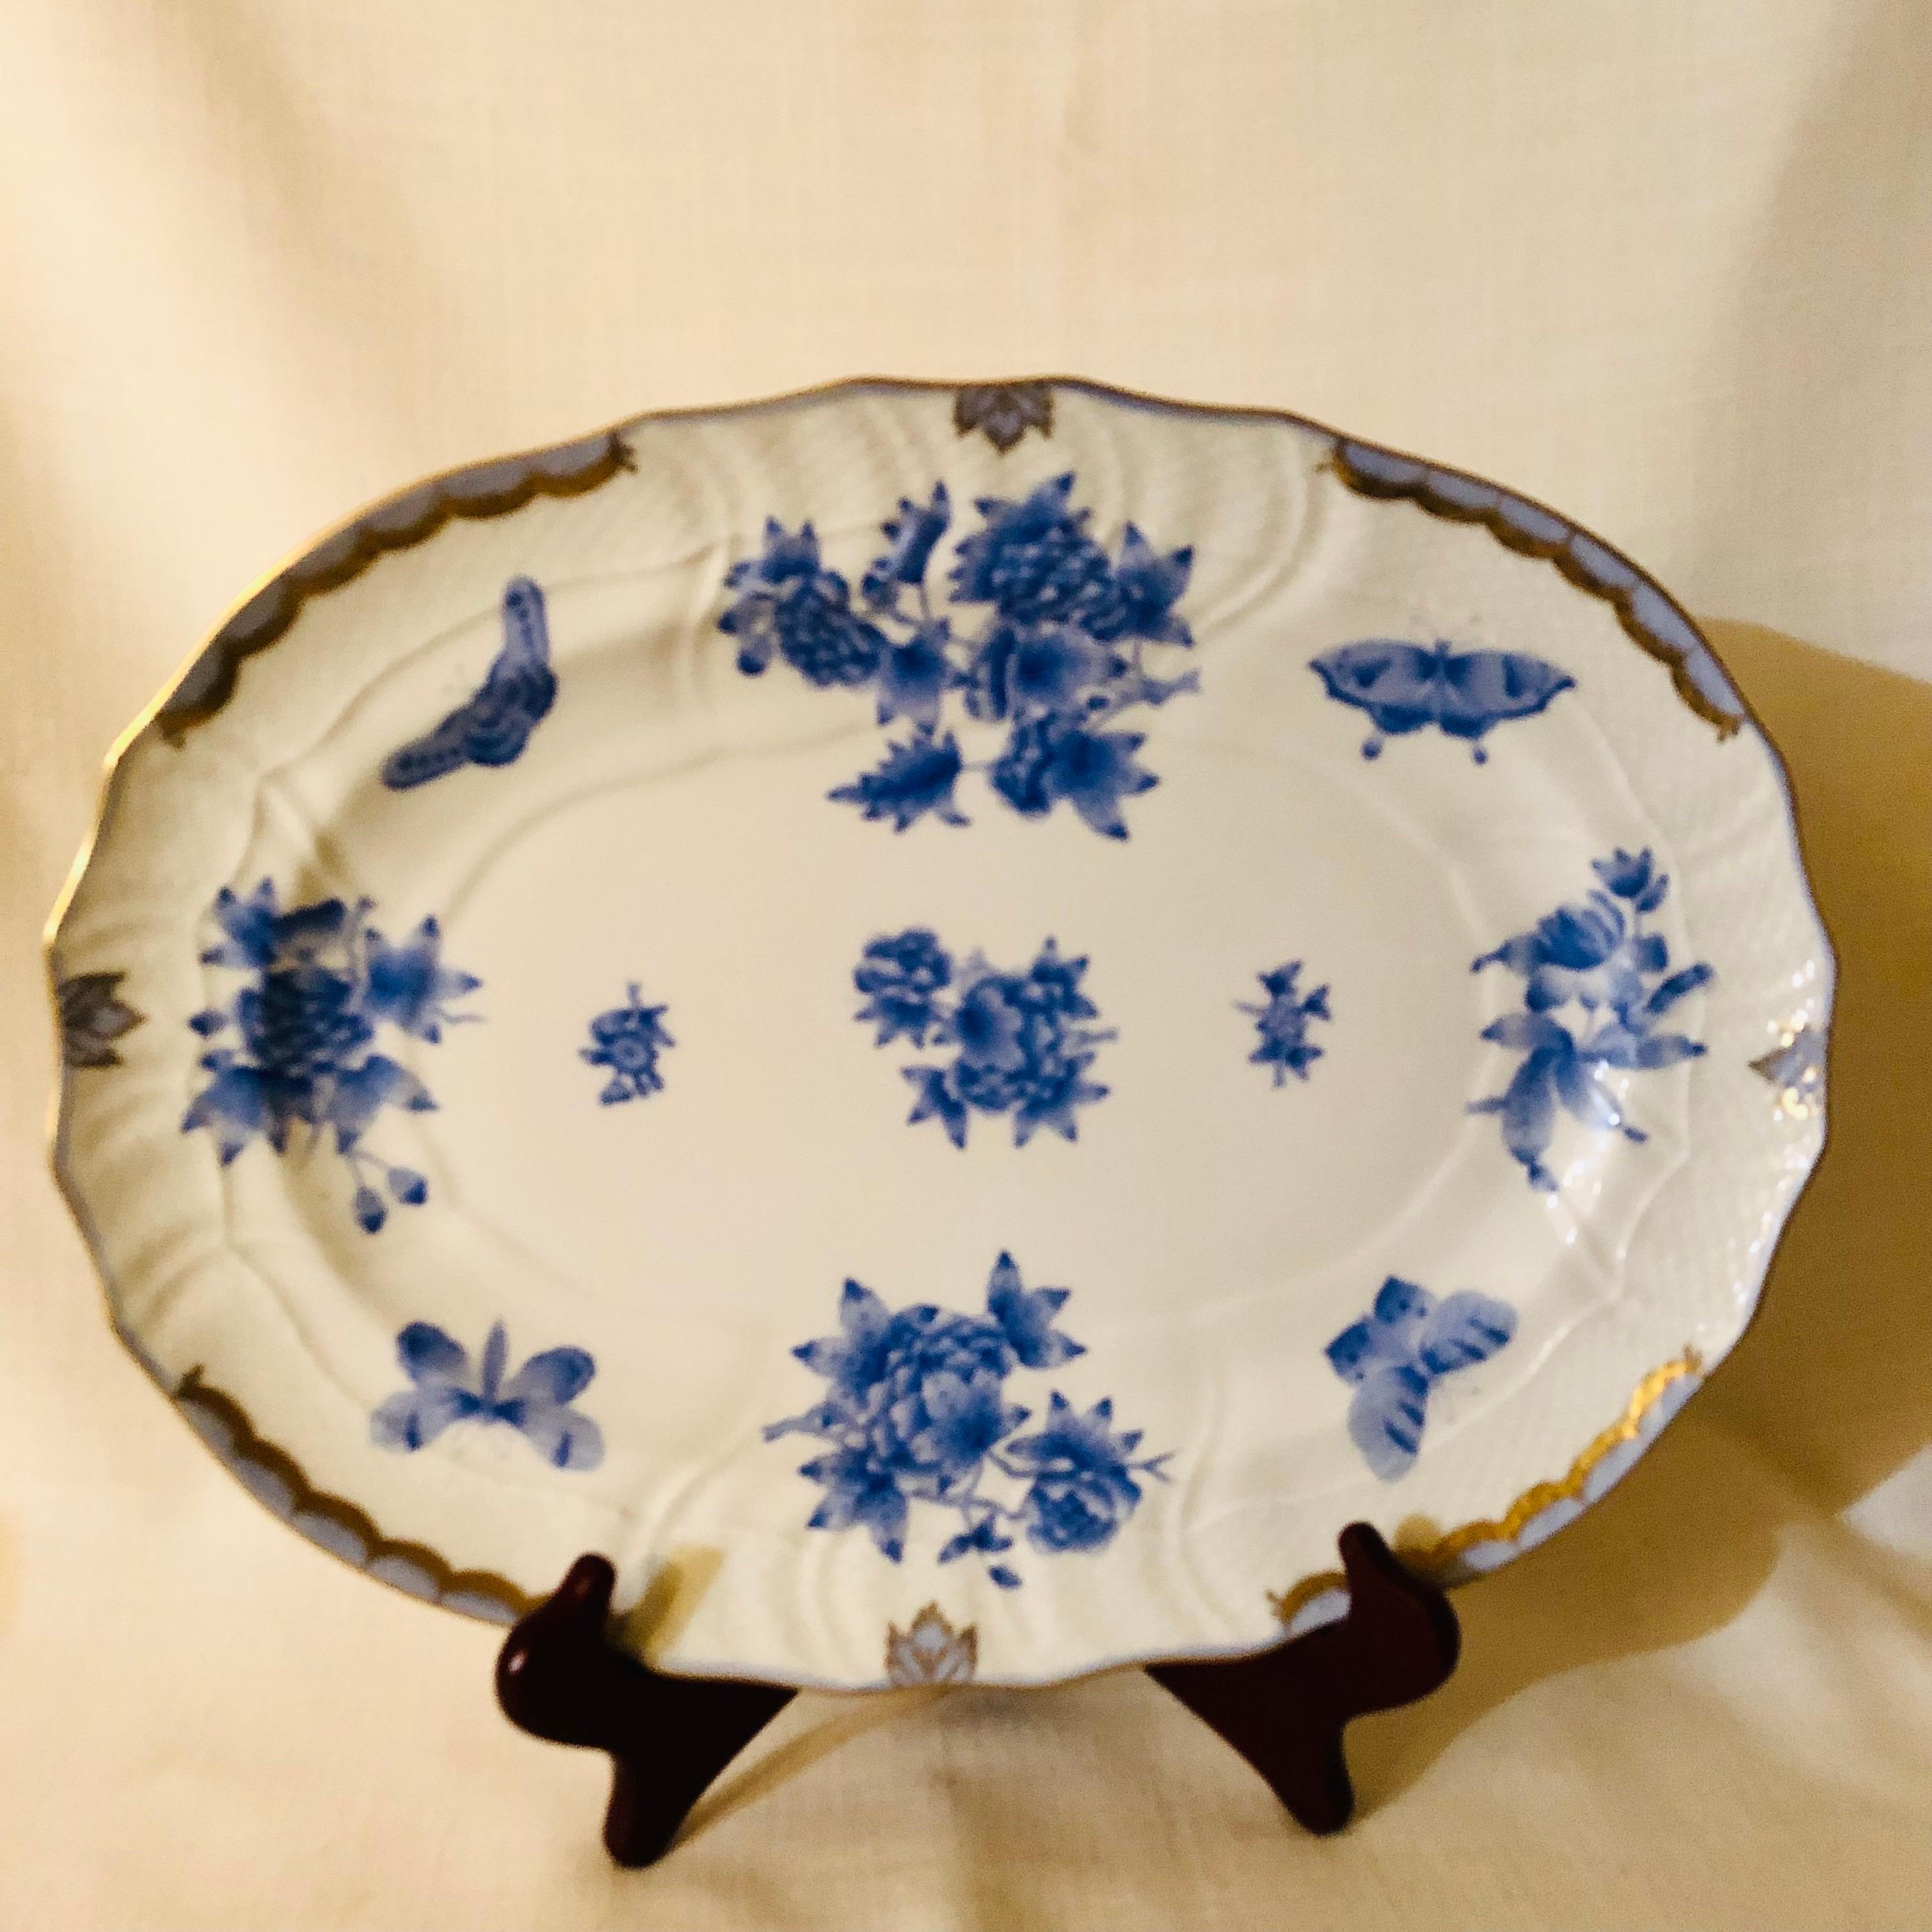 Porcelain Herend Fortuna Oval Platter Painted with Blue Butterflies and Flowers